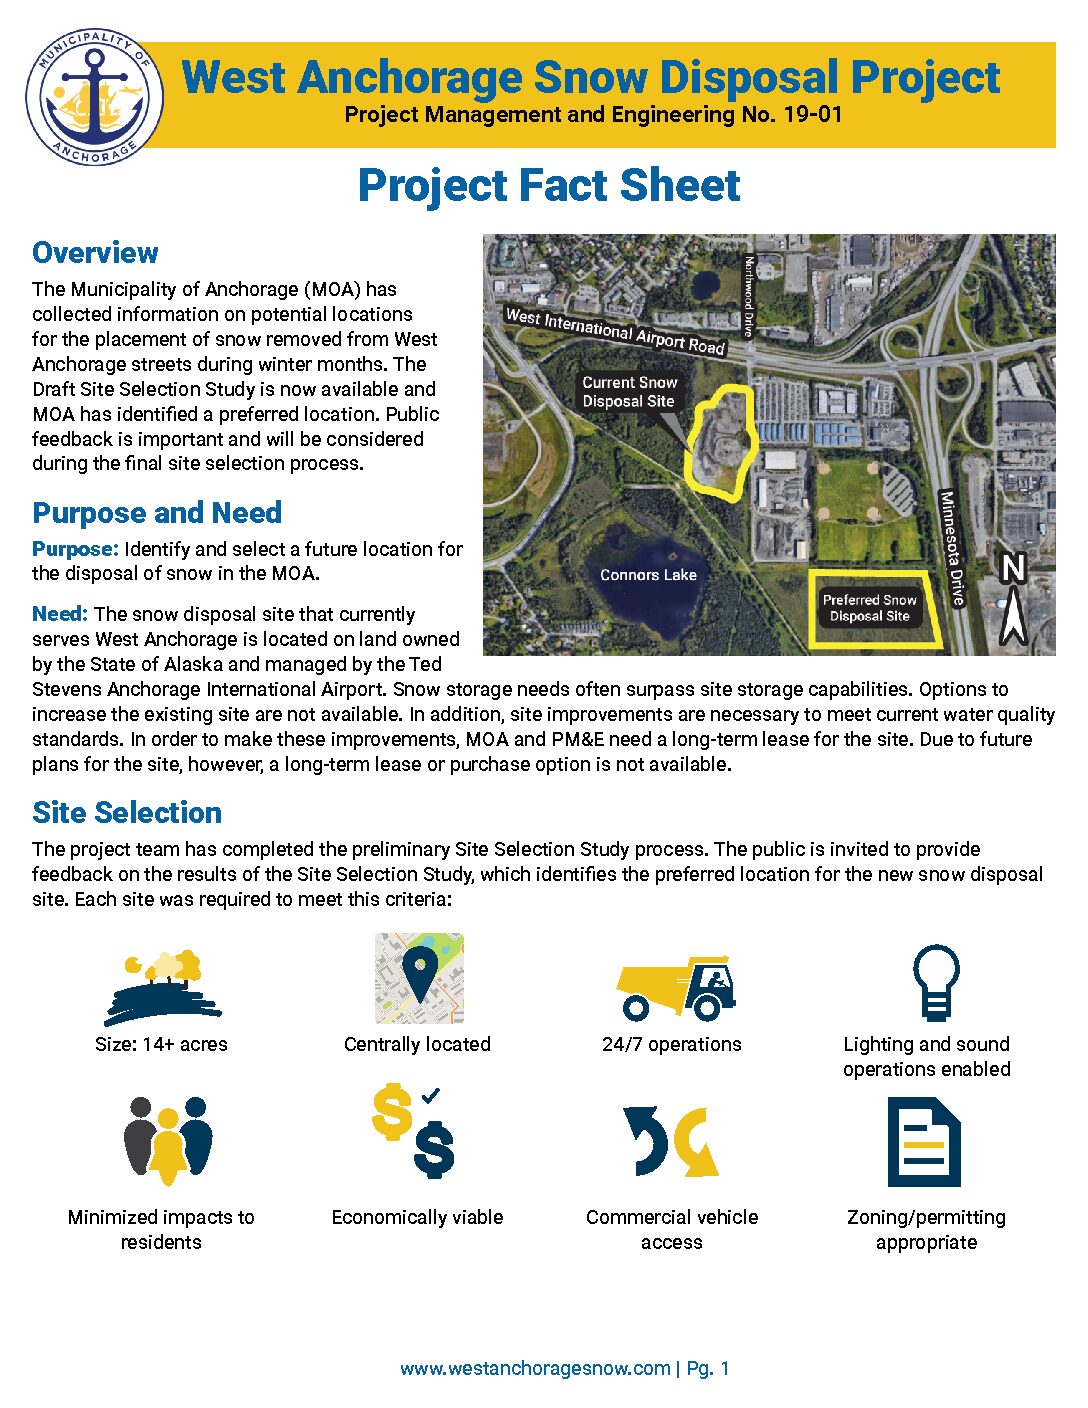 West Anchorage Snow Disposal Project Fact Sheet Download